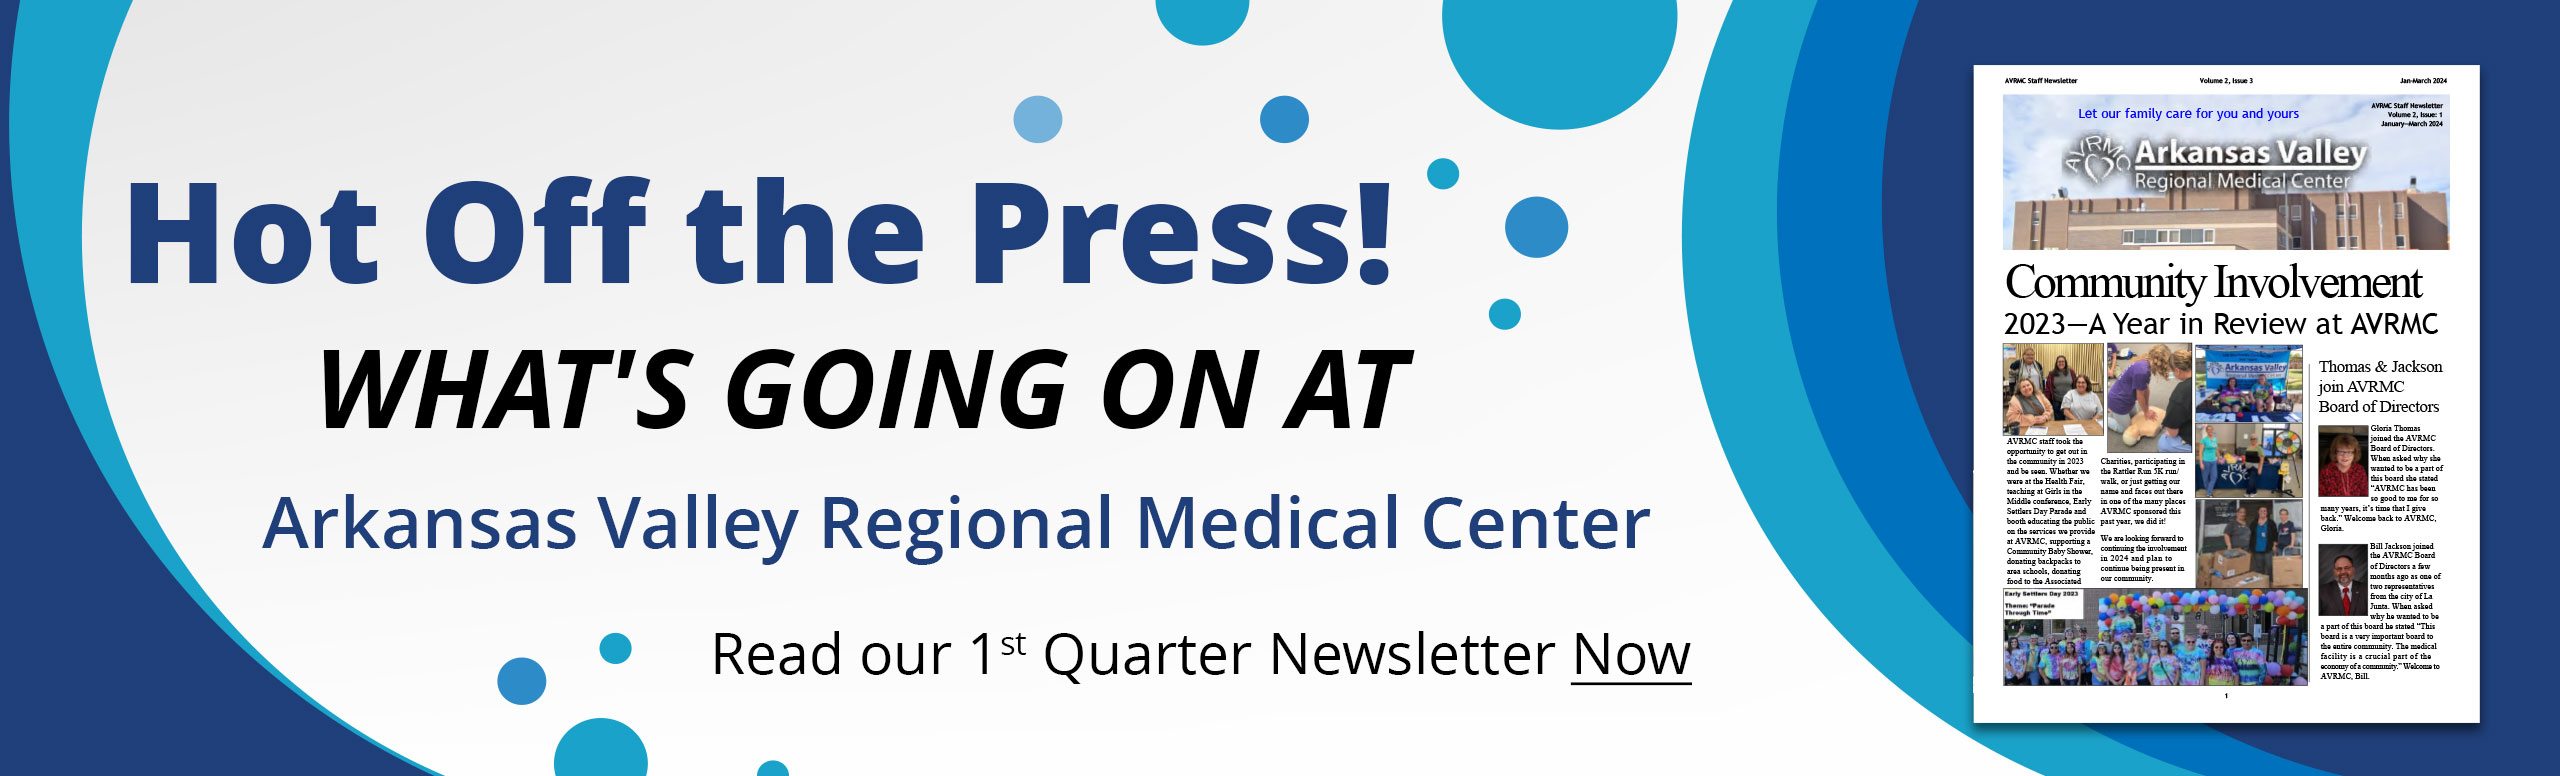 Hot Off the Press!  What's going on at Arkansas Valley Regional Medical Center....

Read our 4th Quarter Newsletter Now.